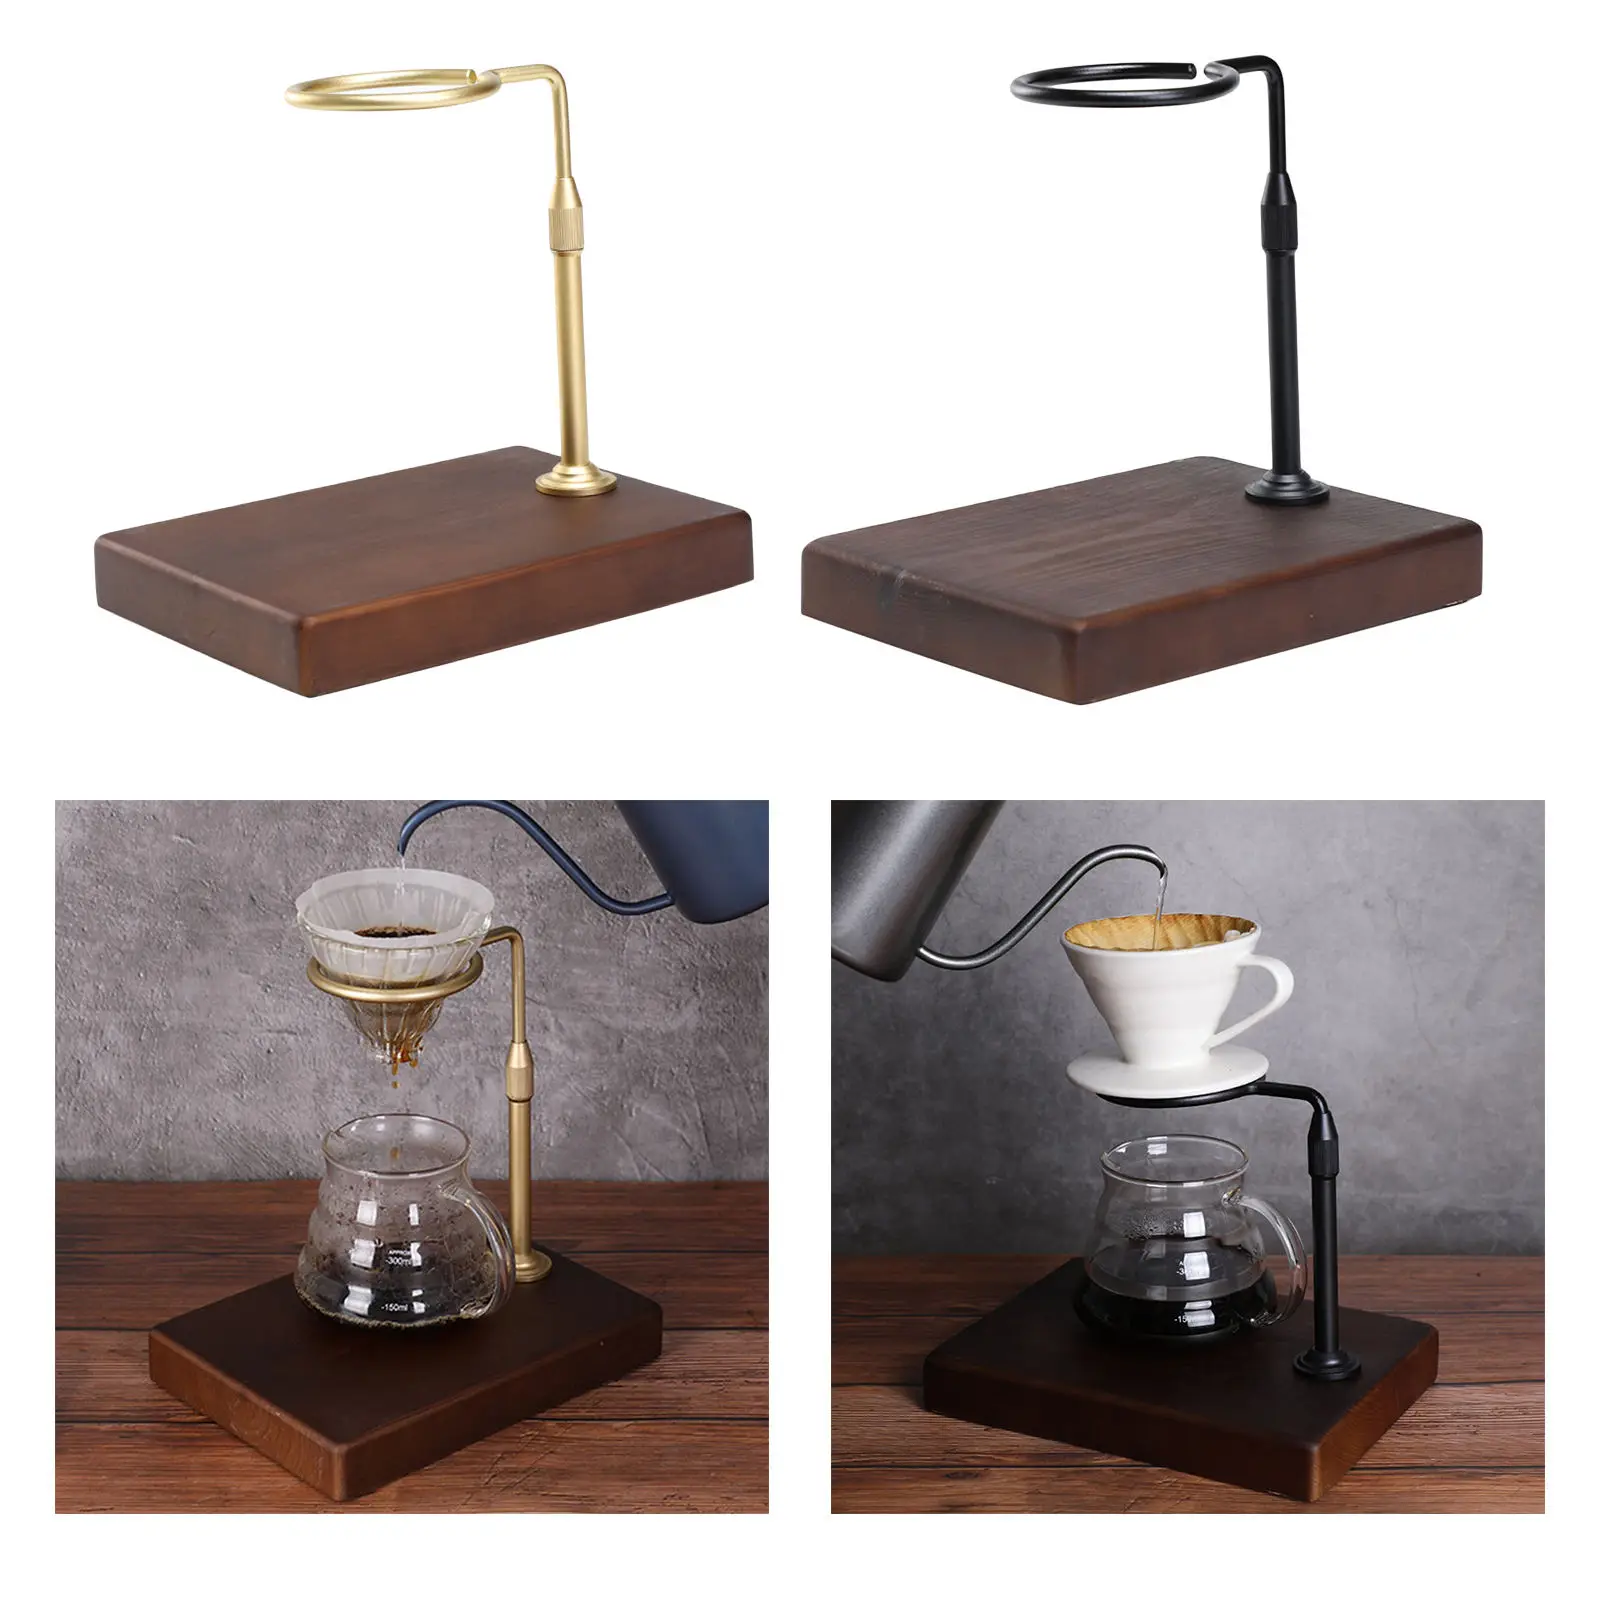 Coffee Dripper Stand Filter Holder Tray Station Tea Dripping Height Adjustable for Home Kitchen Cafe Coffee Maker